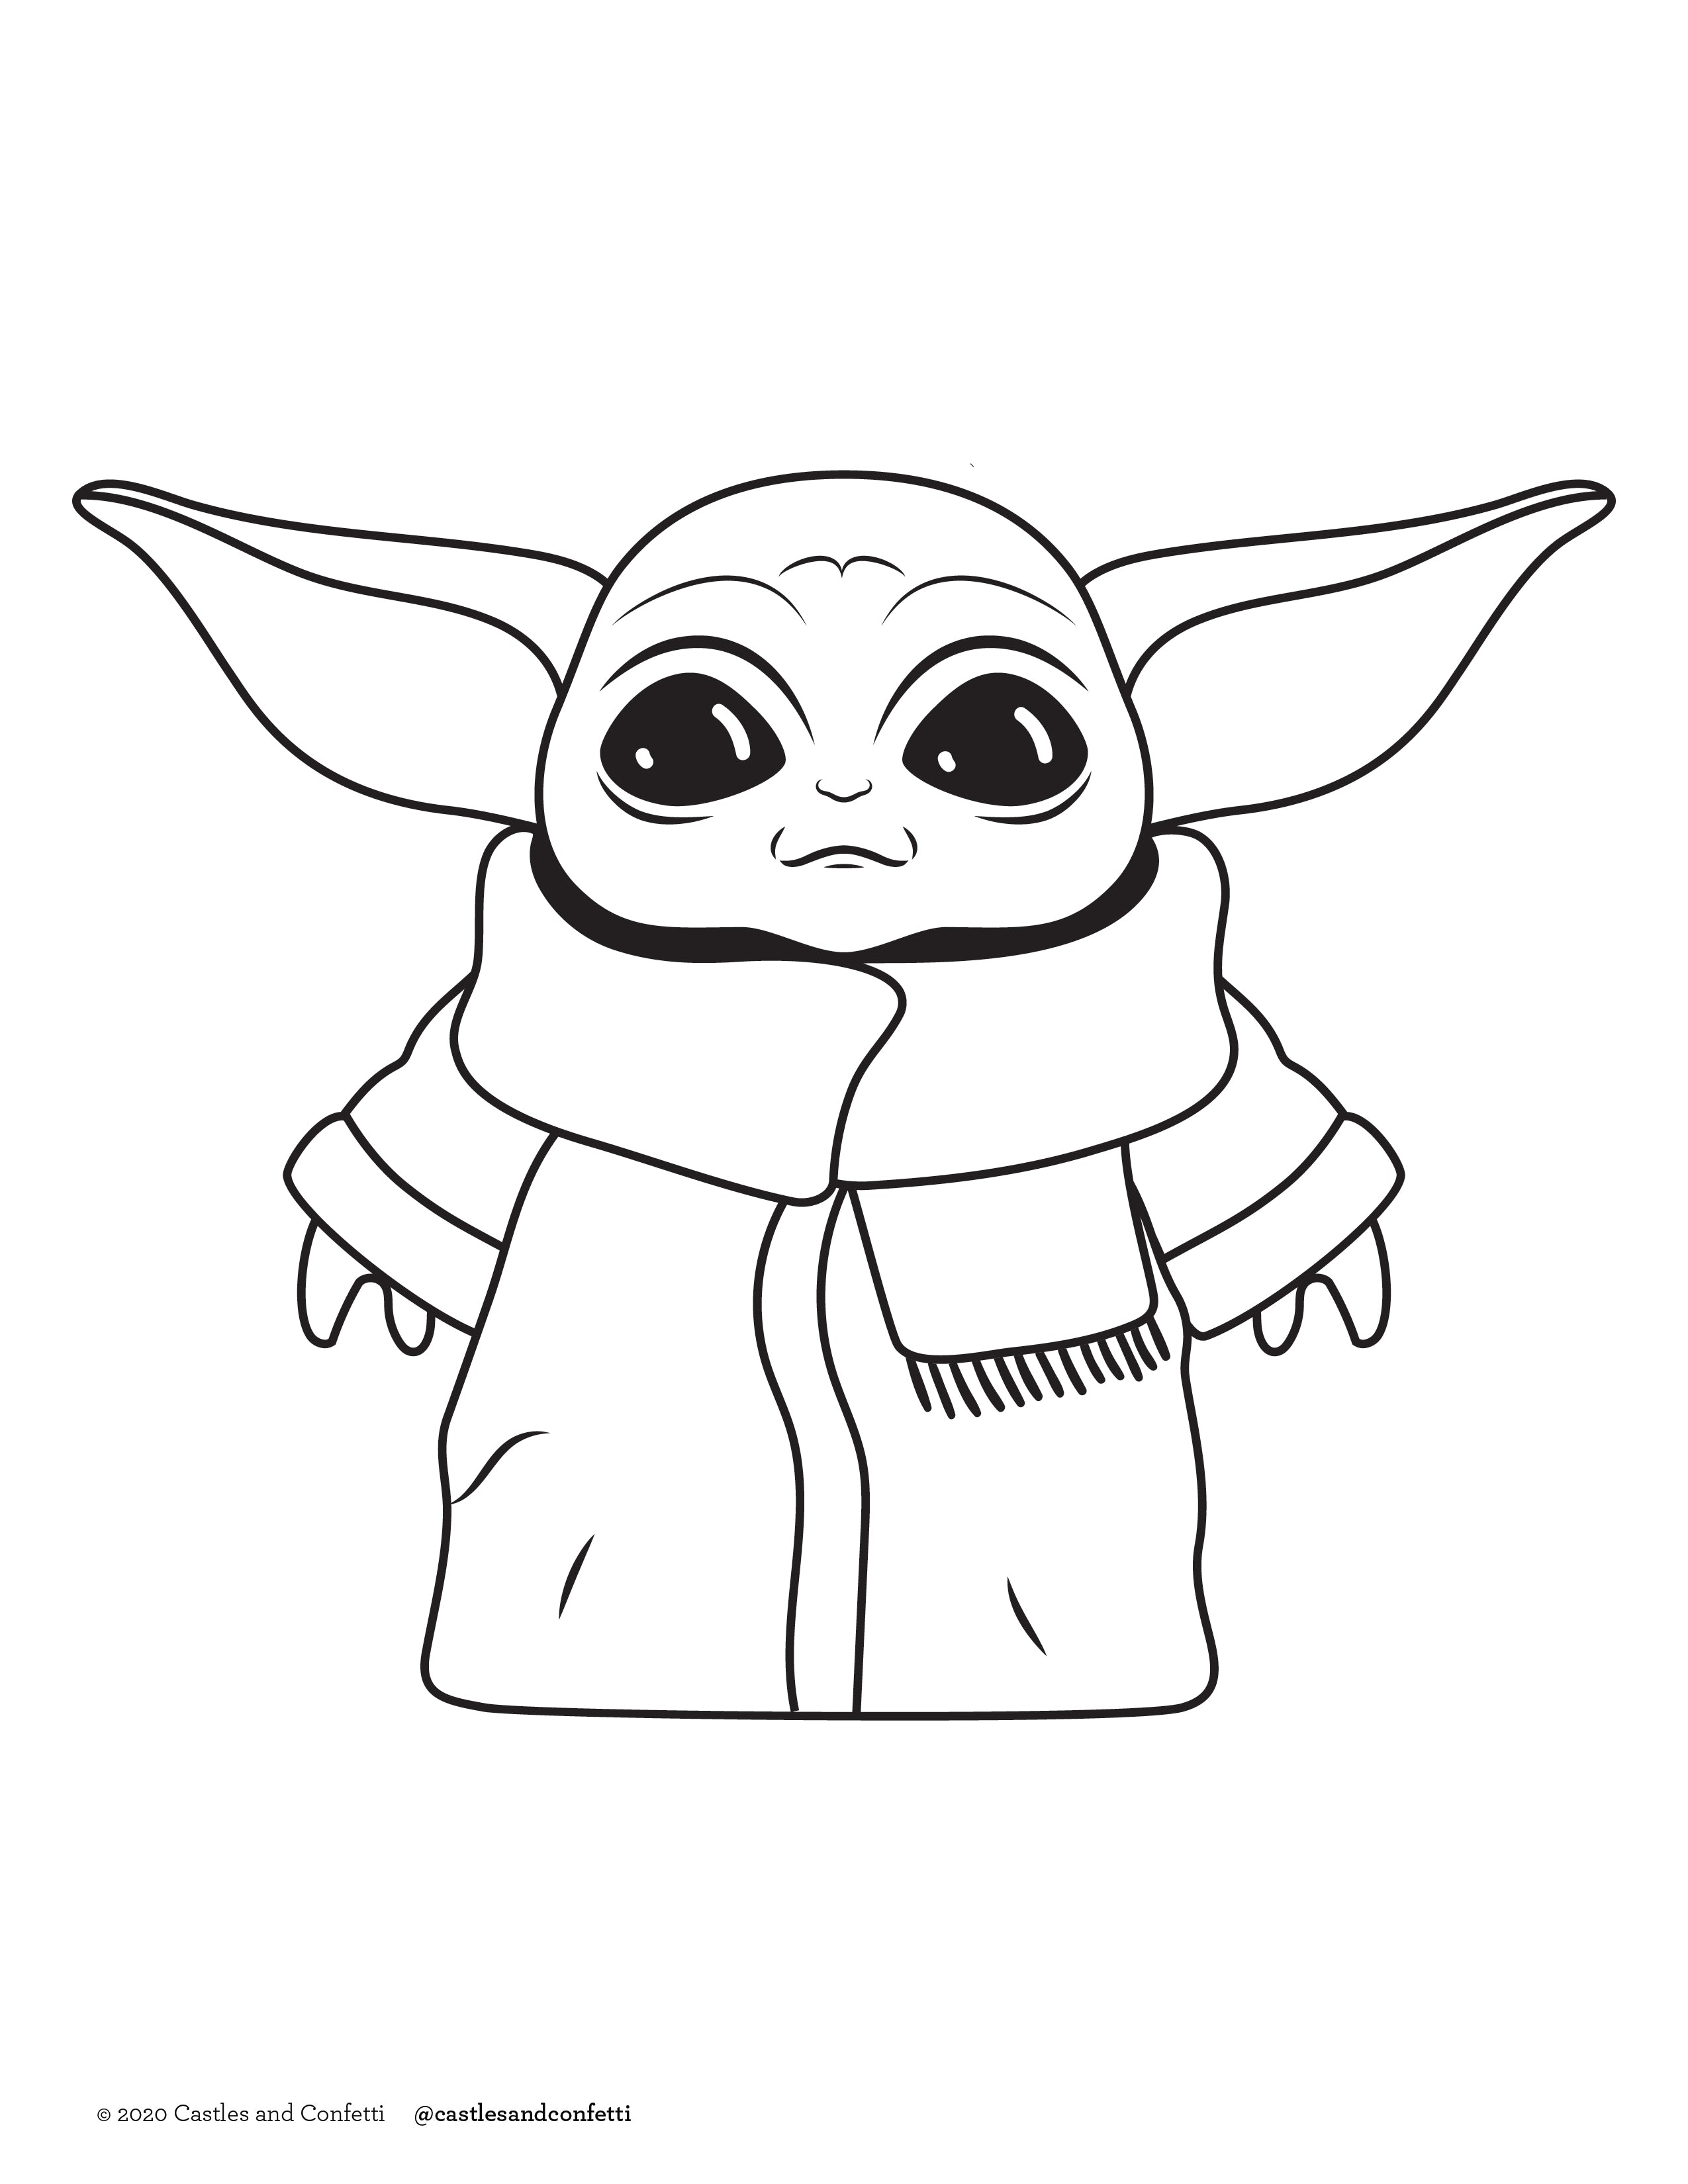 46-best-ideas-for-coloring-yoda-coloring-template